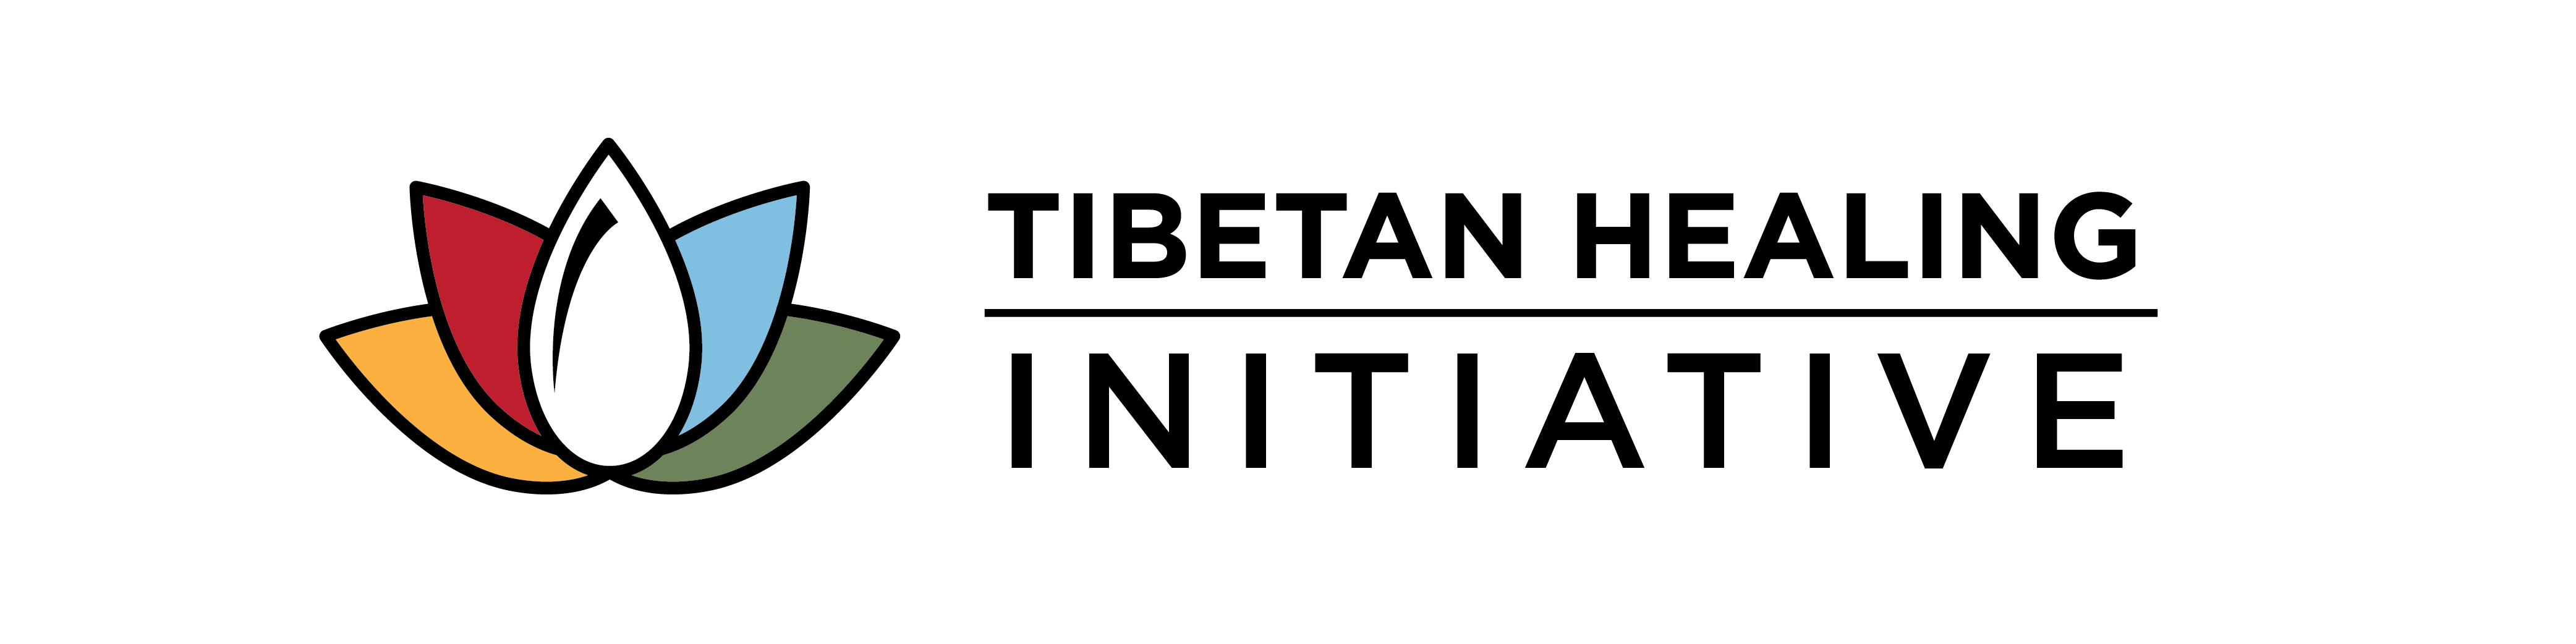 Tibetan Healing Initiative - a lotus illustration colored petals white, red, yellow, blue, and green.